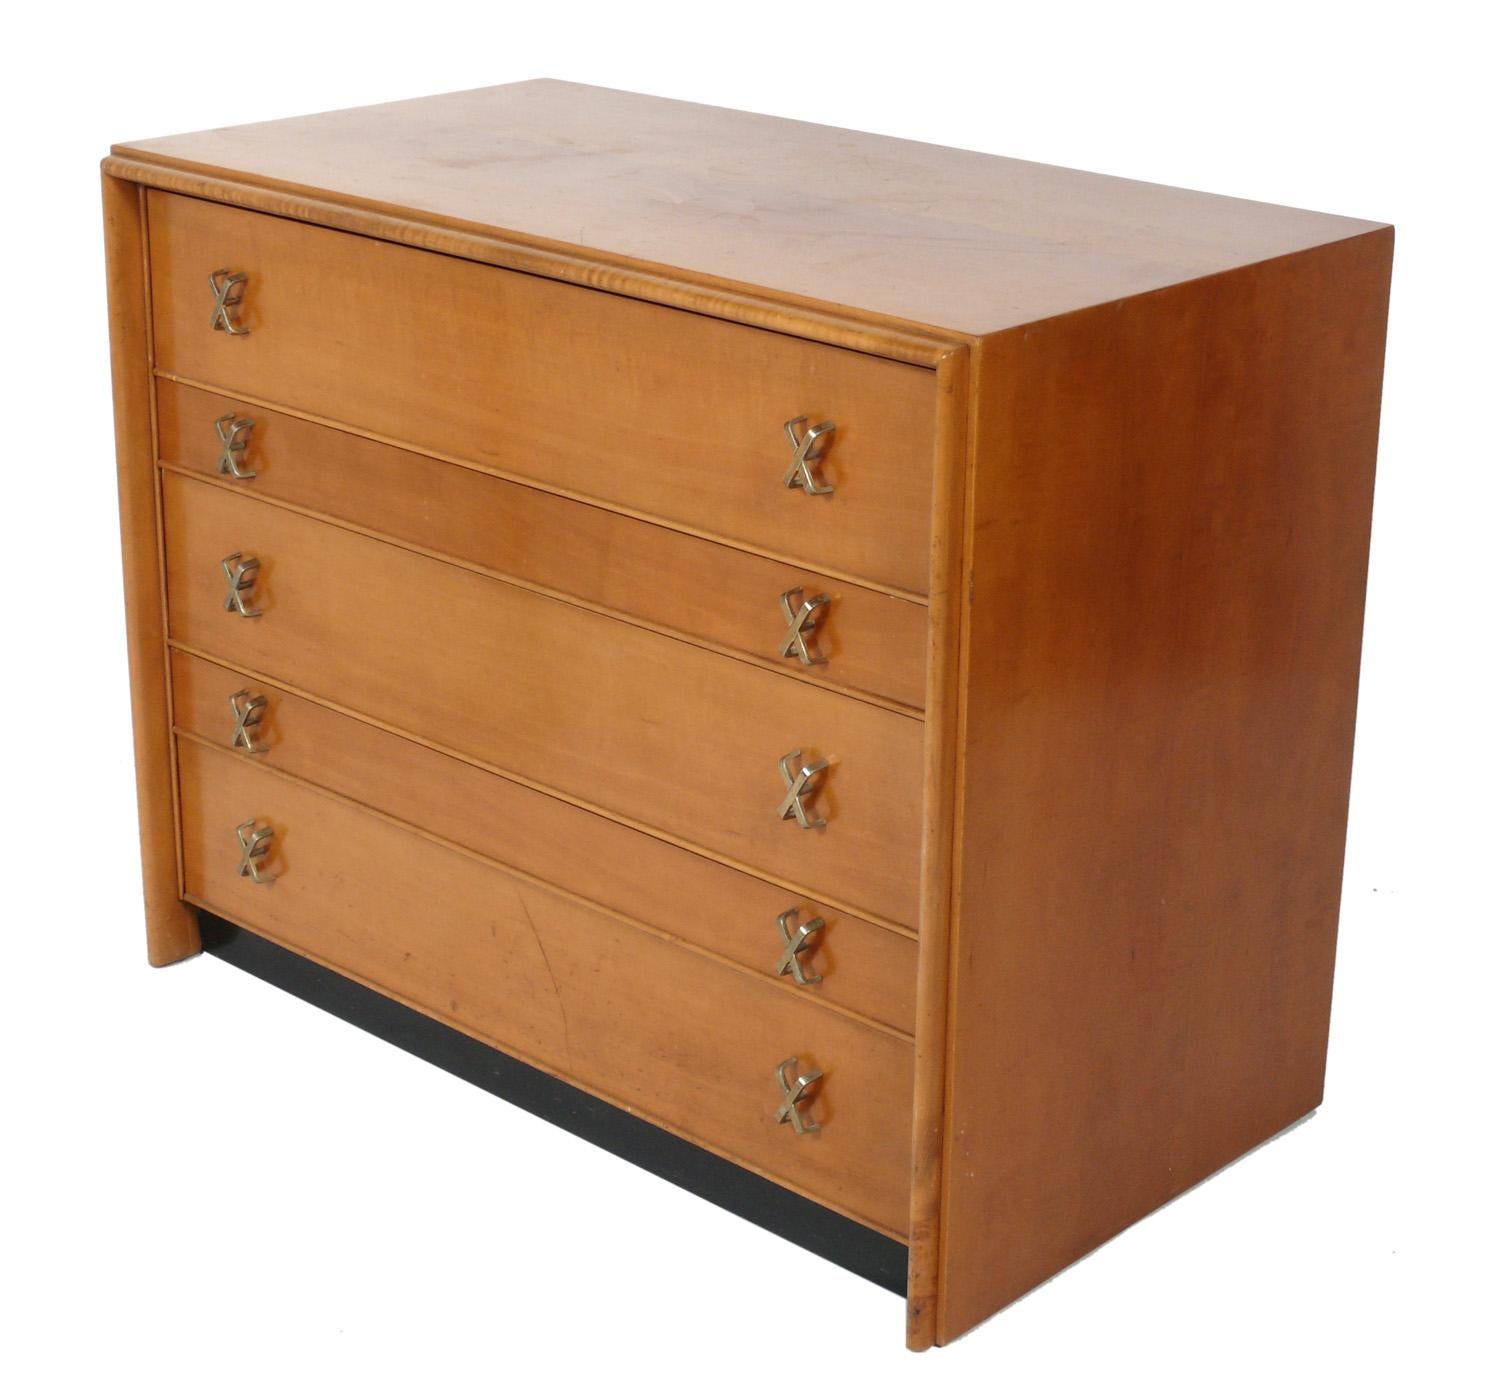 Elegant Chest designed by Paul Frankl for Johnson Furniture, American, circa 1950s. It is currently being refinished and can be completed in your choice of color. The hardware is a matte nickel. It is a versatile size and can be used as a chest or